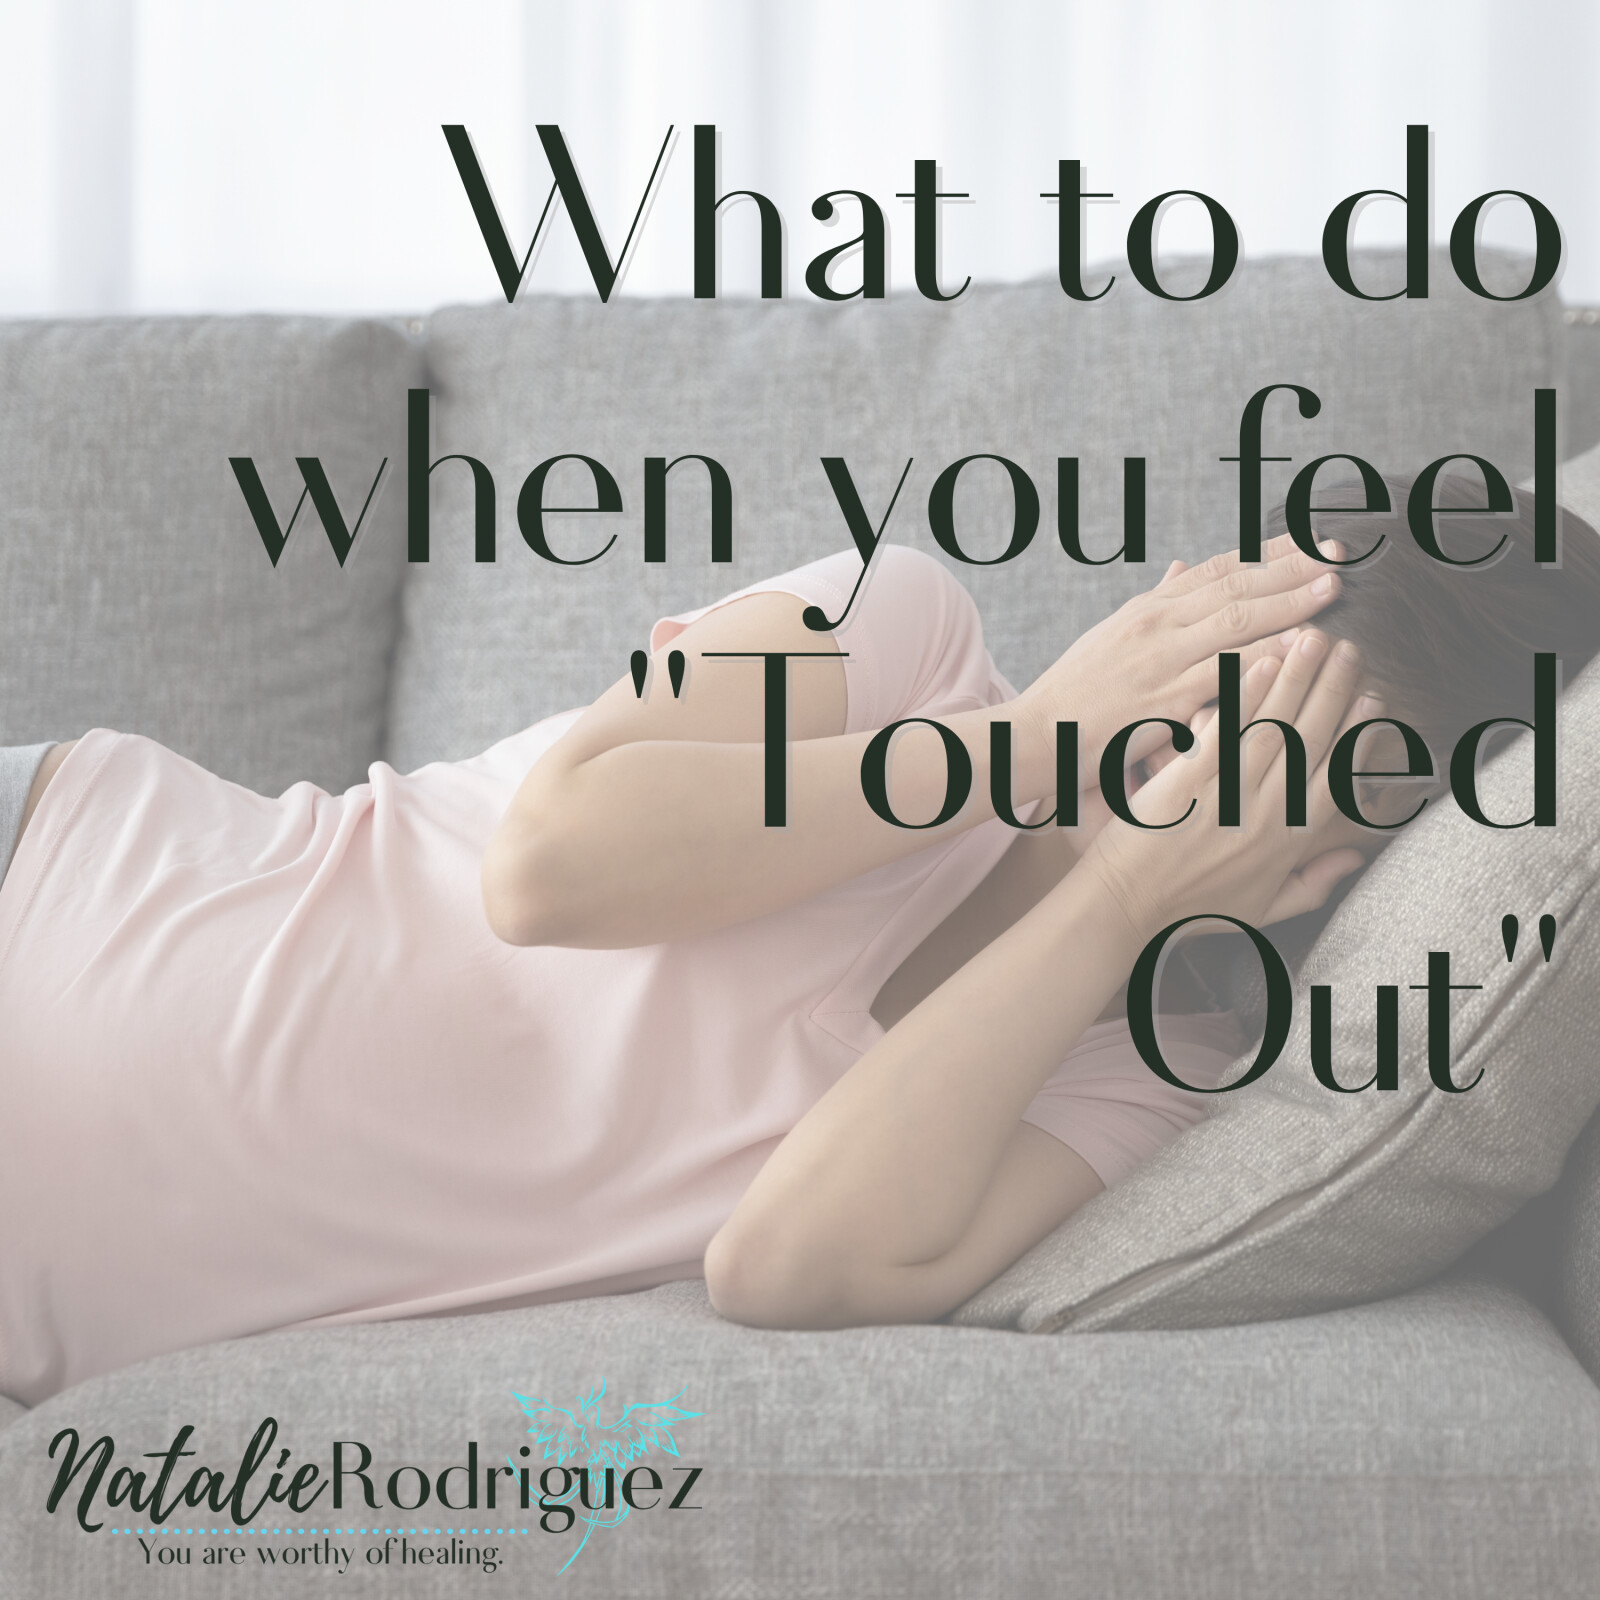 What To Do When You Are "Touched Out"